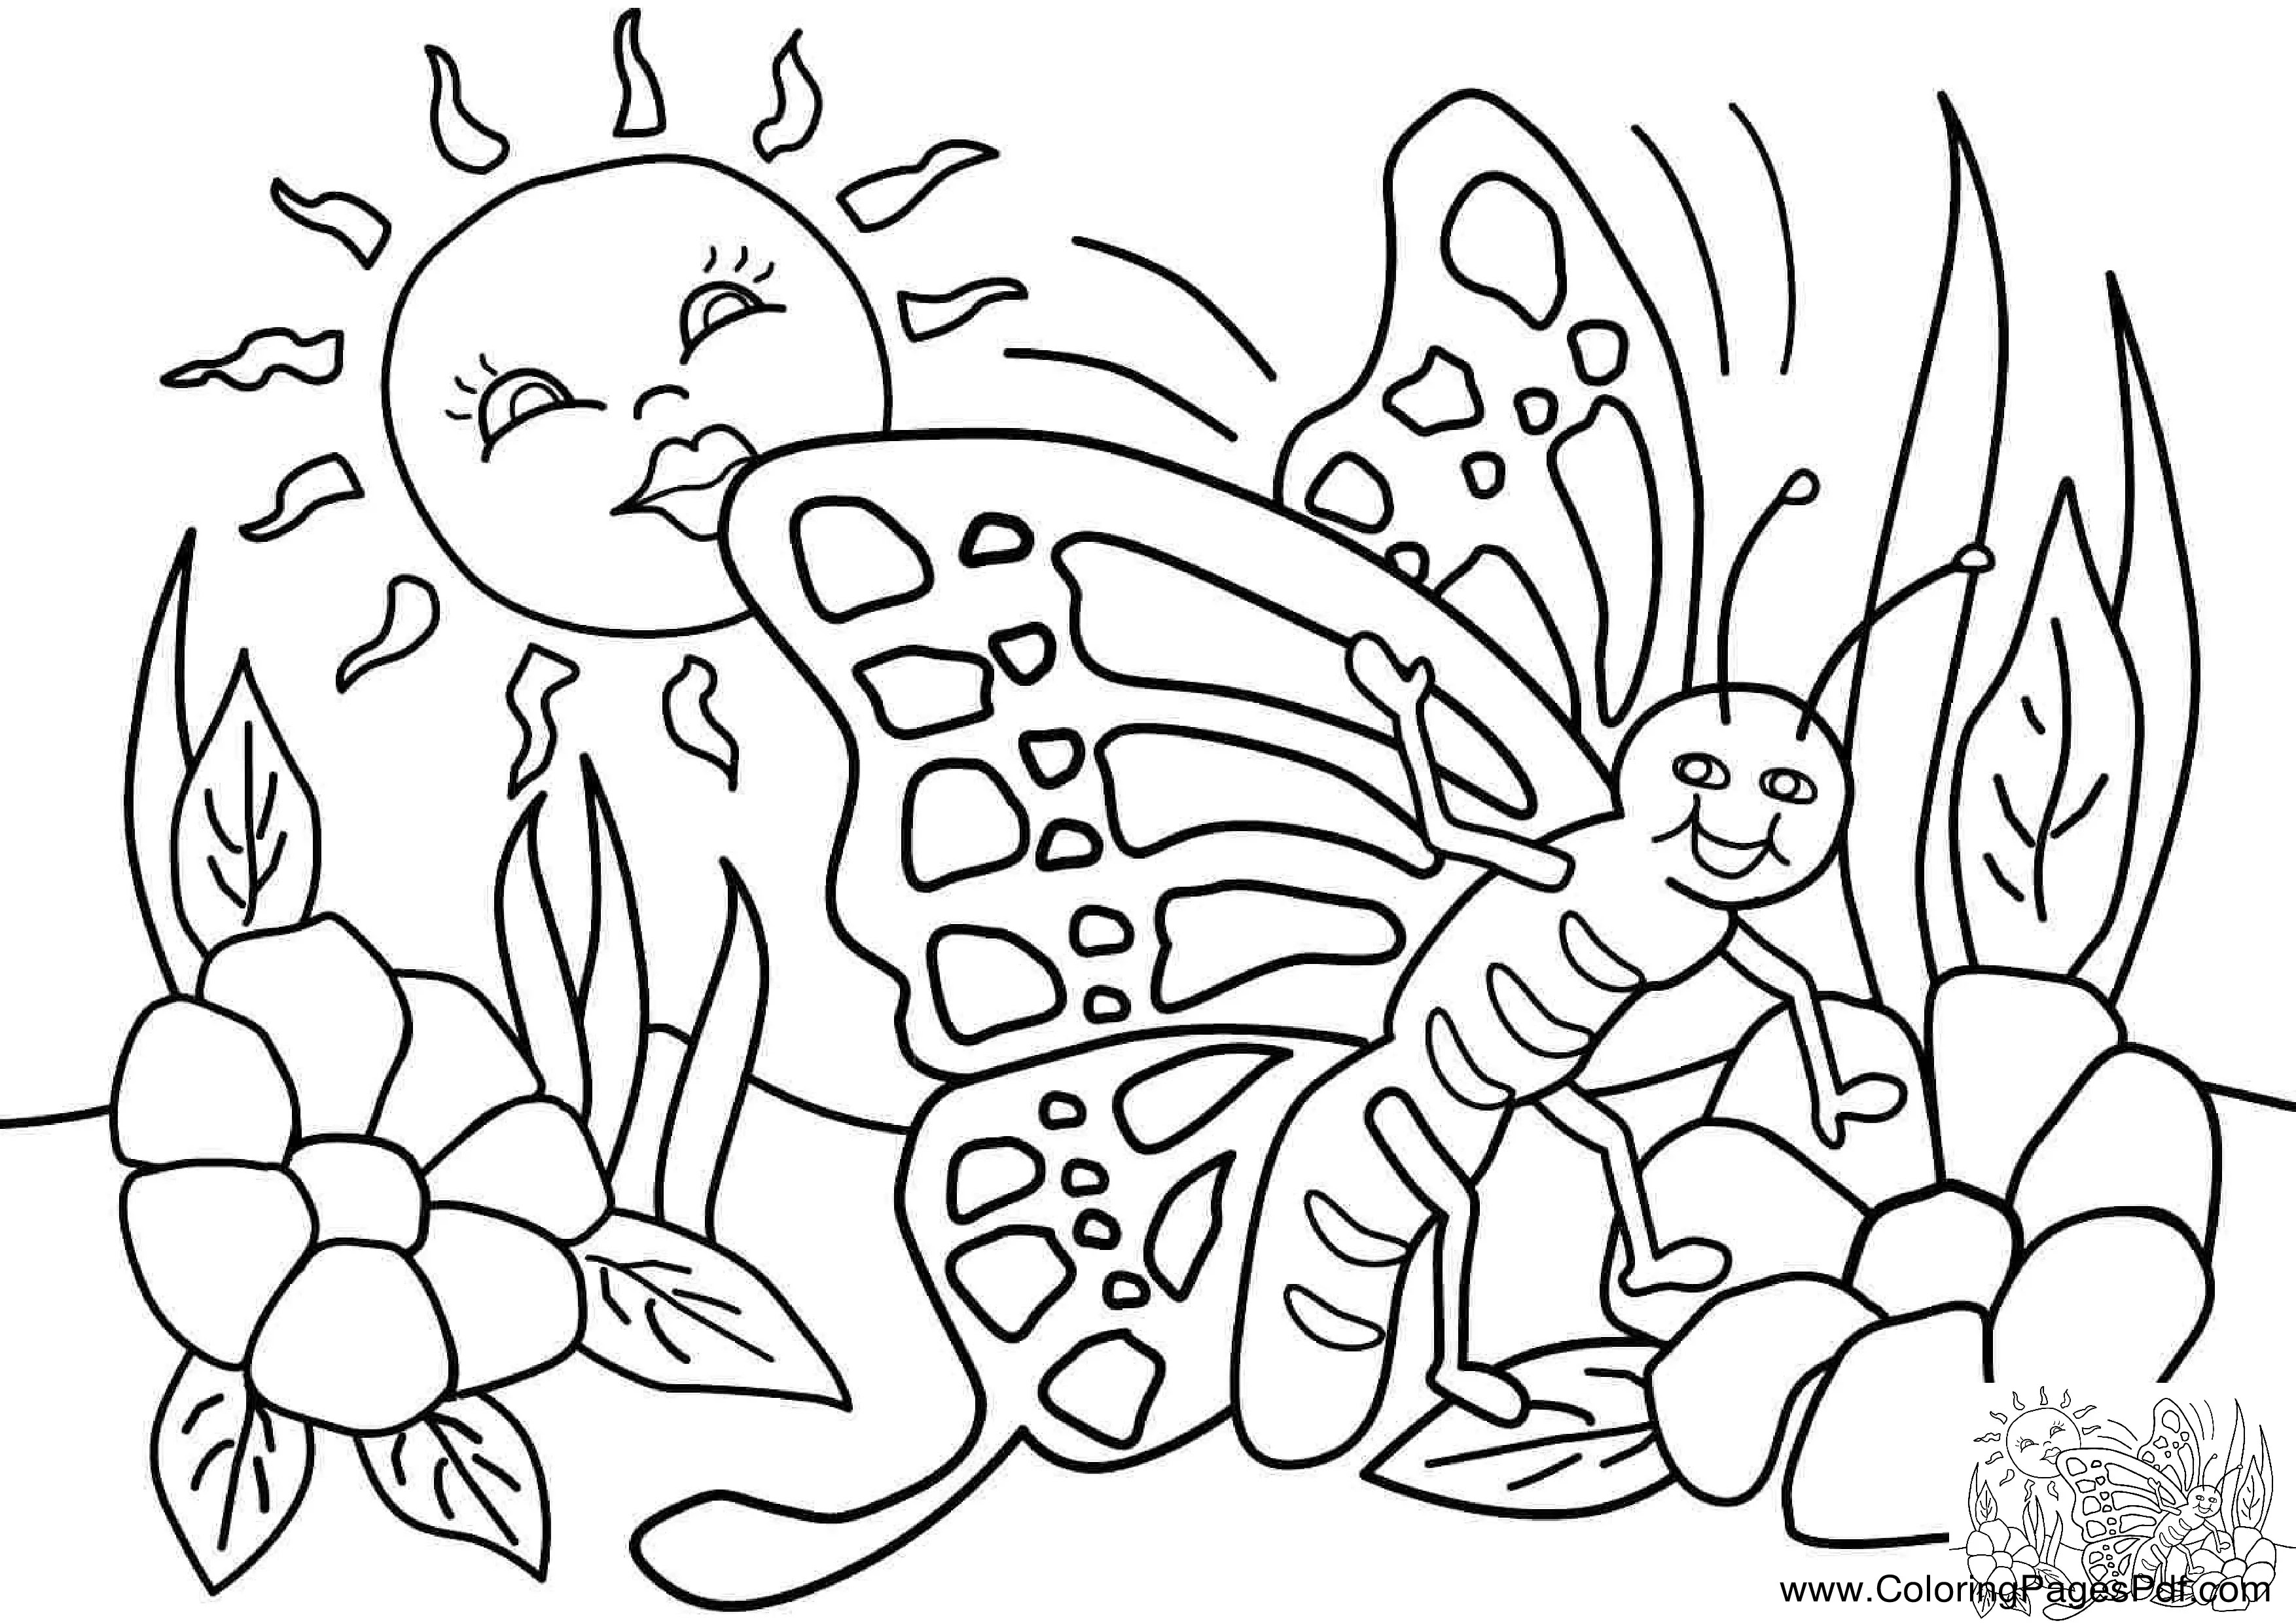 Coloring pages for kids printable